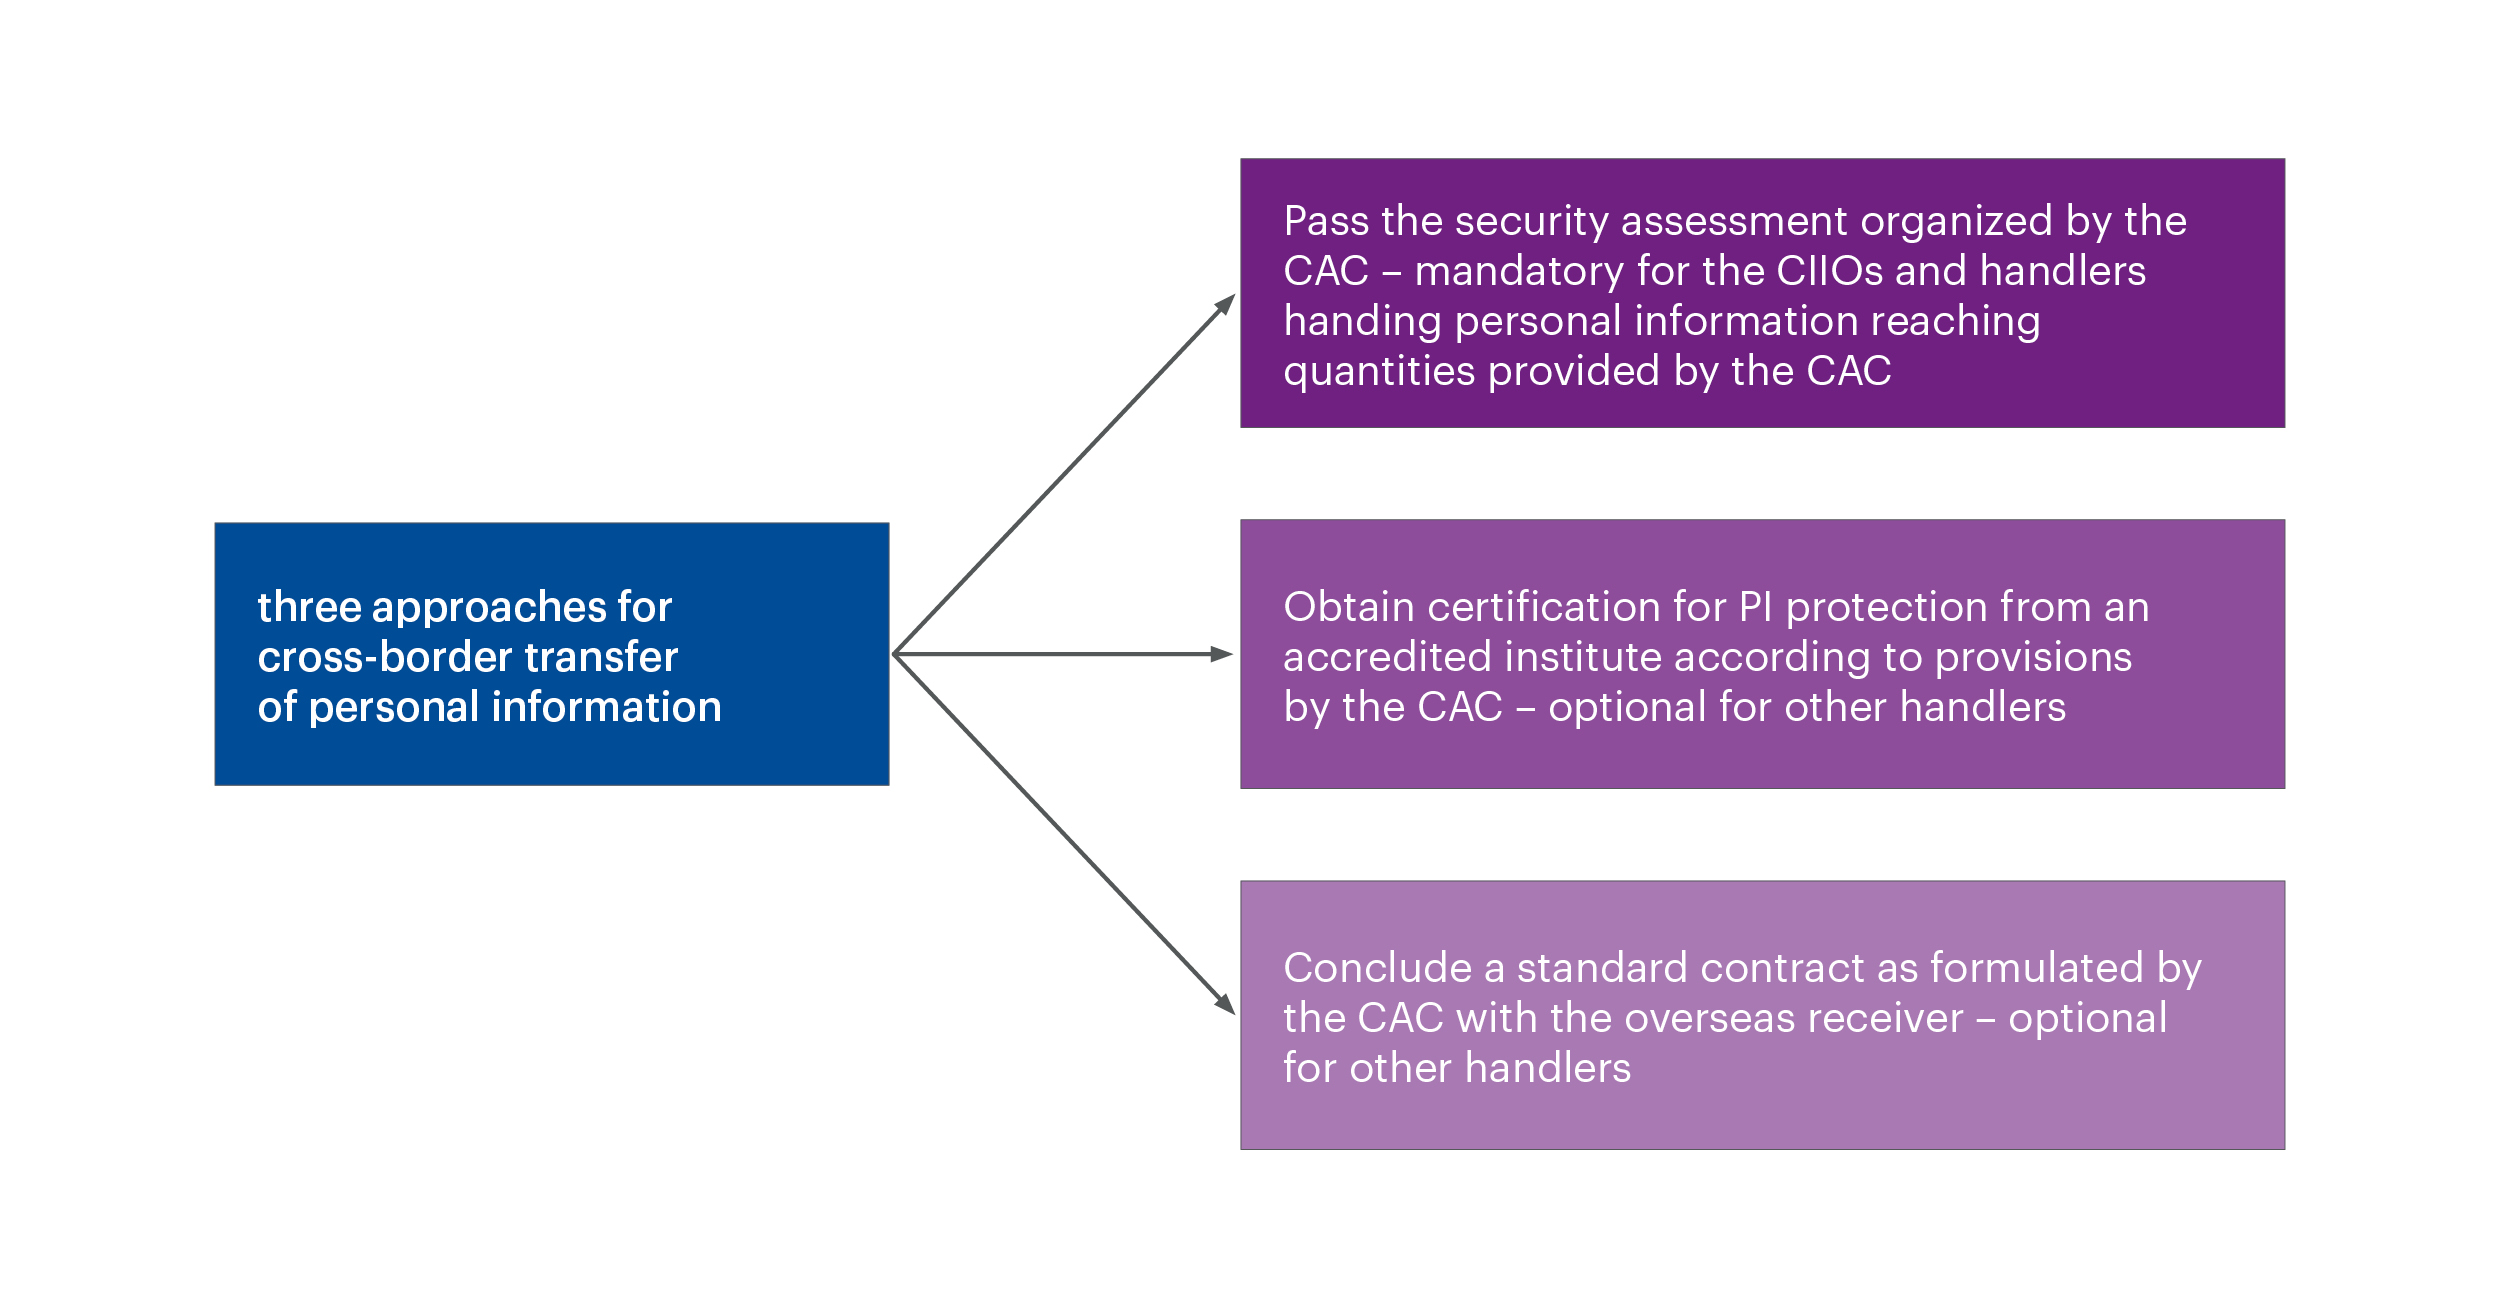 Overview of the three PI export mechanisms provided by the PIPL. There are three approaches for cross-border transfer of personal information, first, pass the security assessment organized by the CAC - mandatory for the ClIOs and handlers handing personal information reaching quantities provided by the CAC, second, obtain certification for Pl protection from an accredited institute according to provisions by the CAC - optional for other handlers, third, conclude a standard contract as formulated by the CAC with the overseas receiver - optional for other handlers.